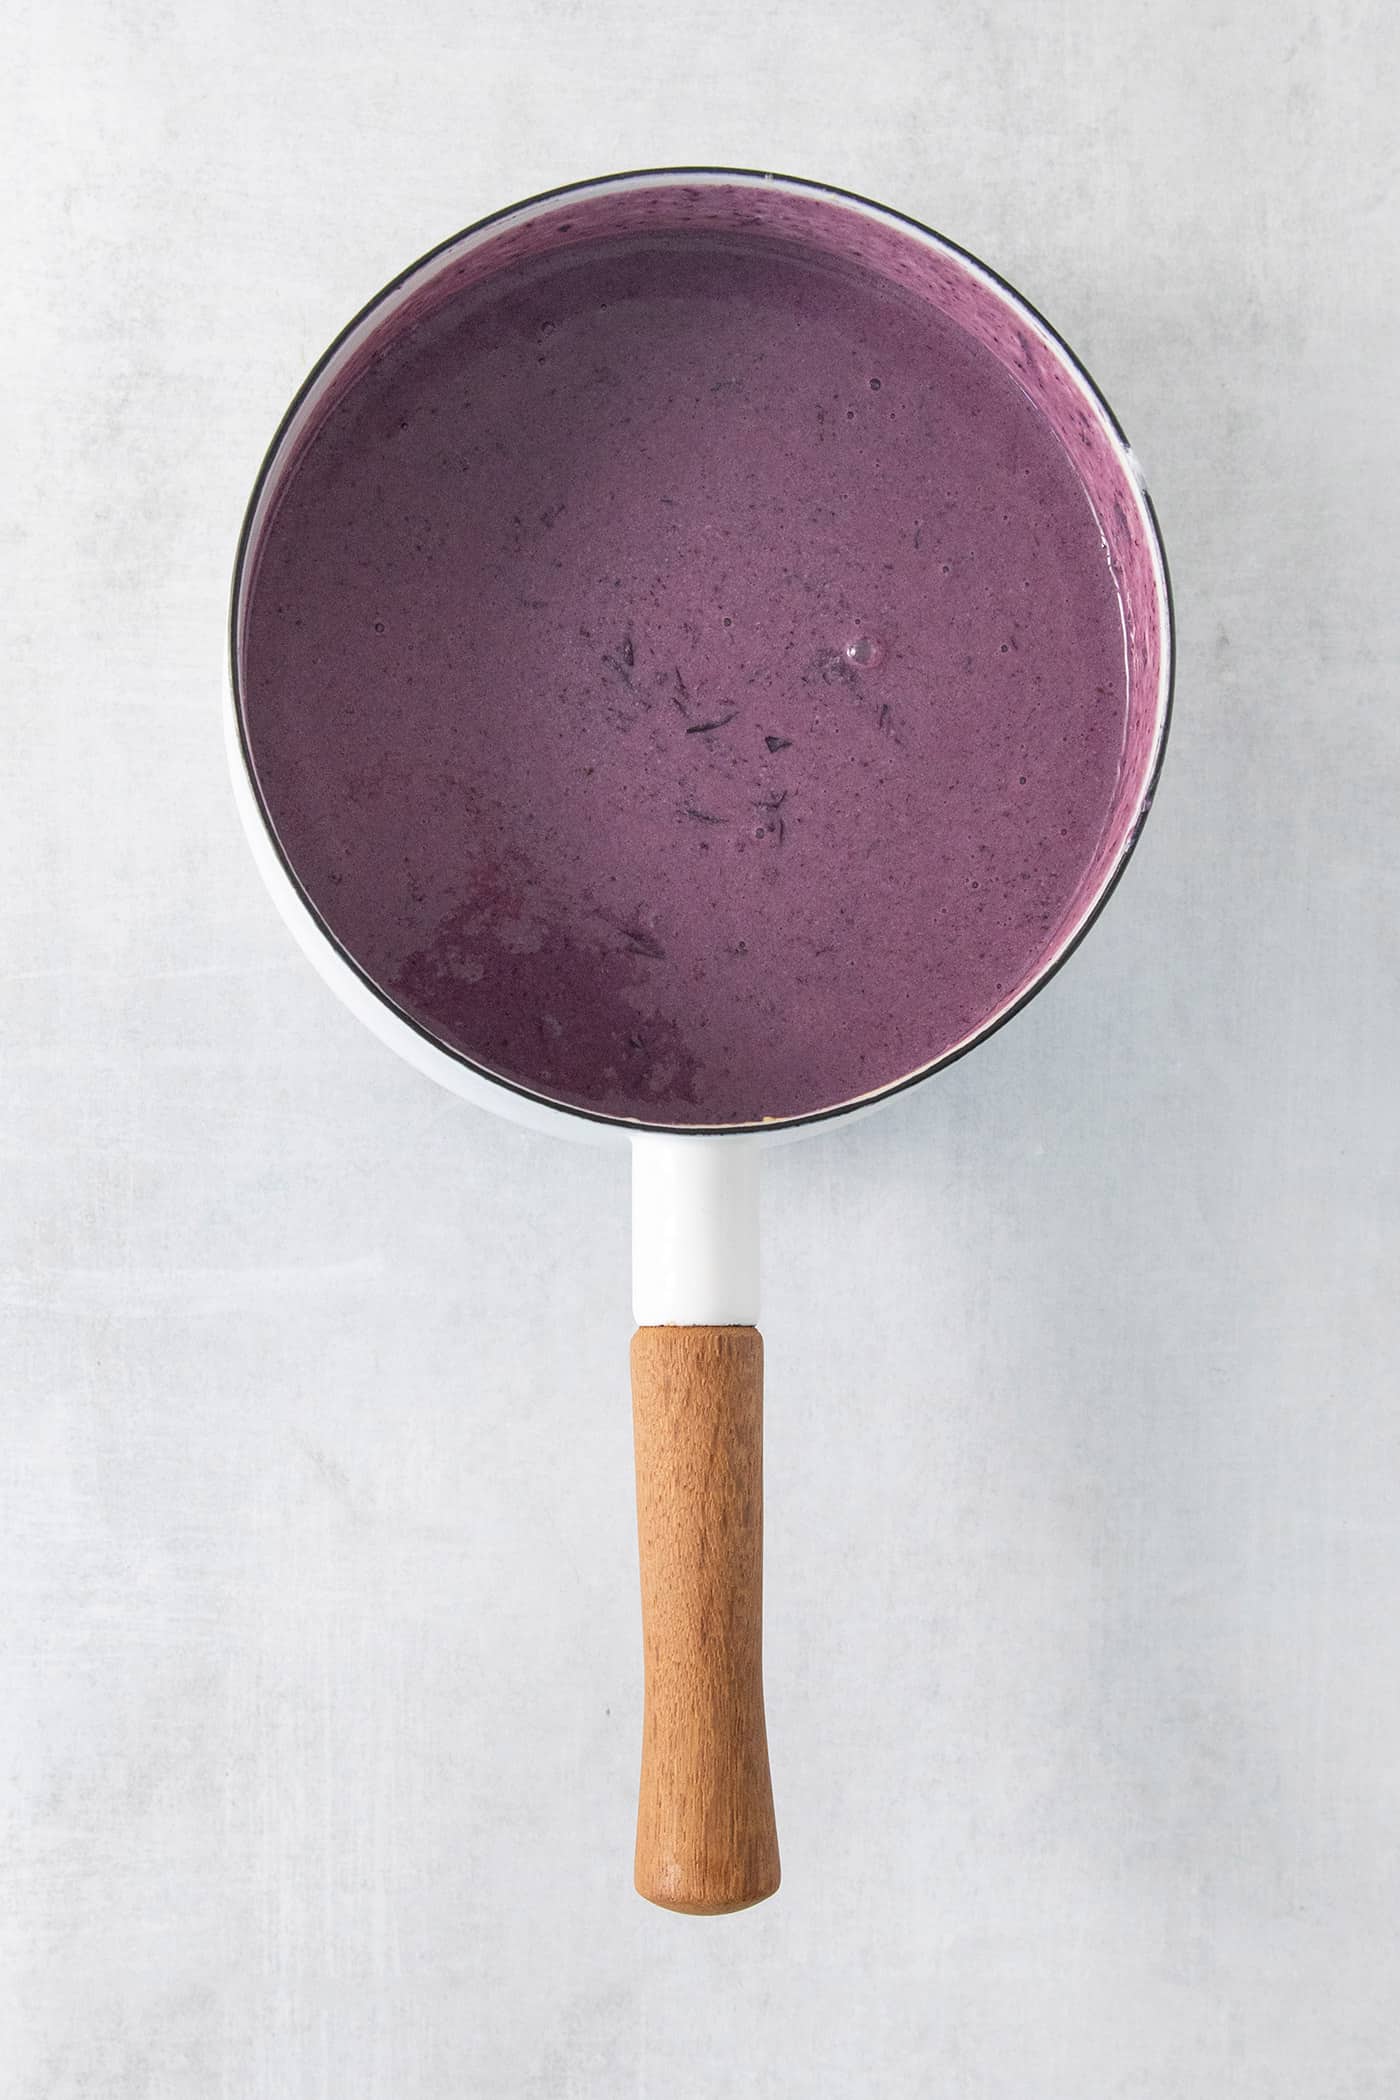 Blueberry puree in a pot.